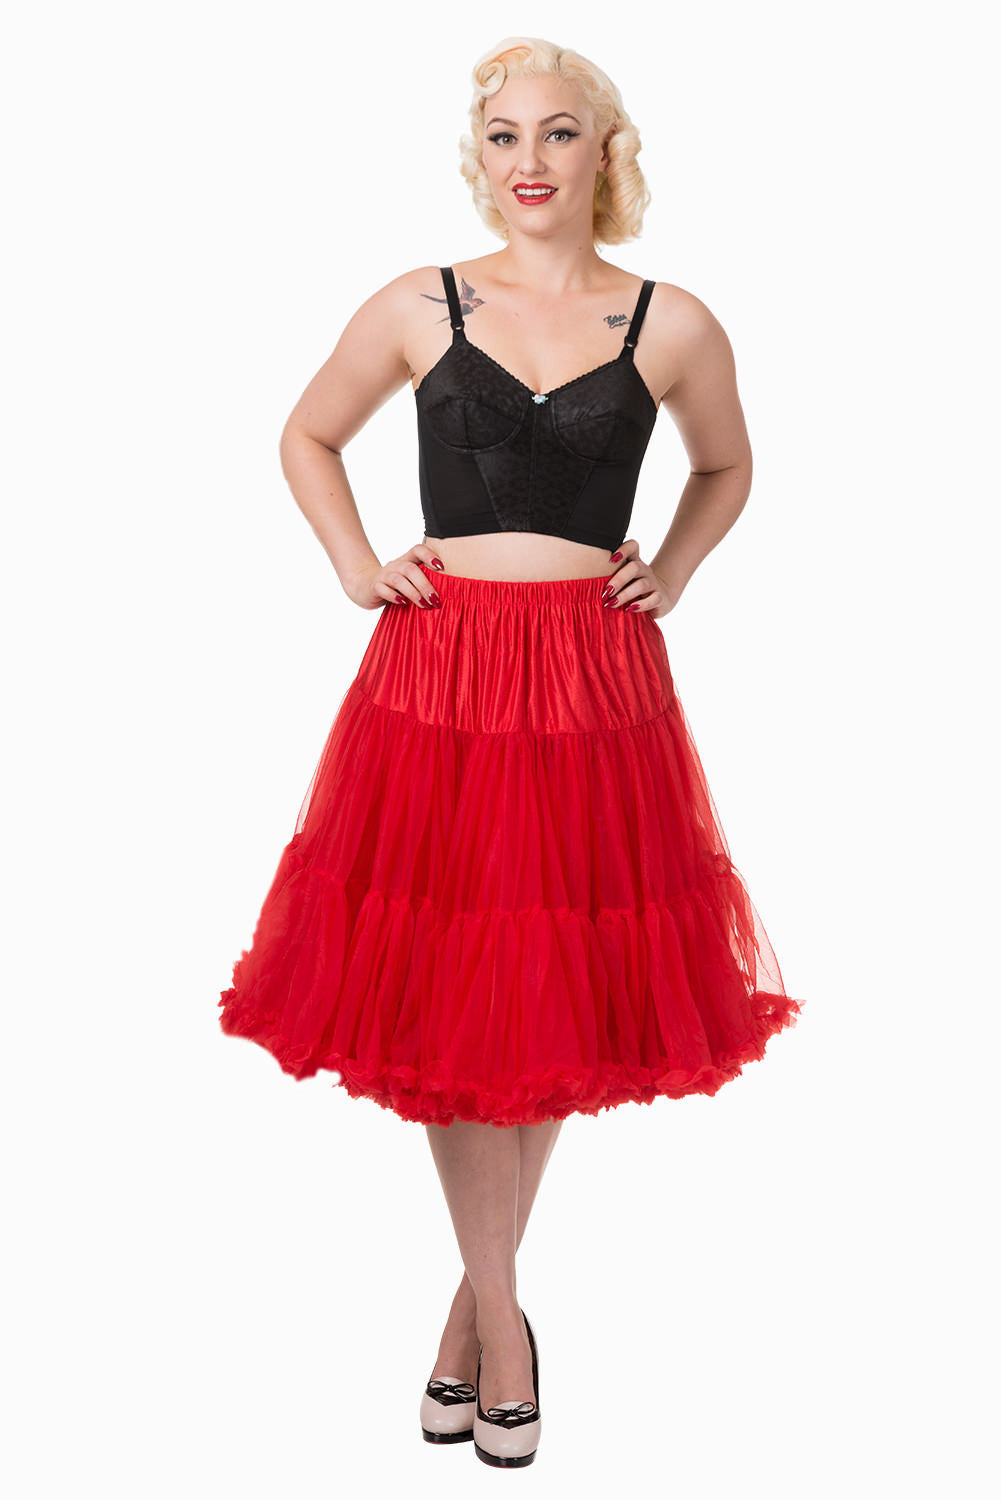 Blonde woman wearing red lipstick standing with her hands on her hips wearing a classic 50s red petticoat and high heels